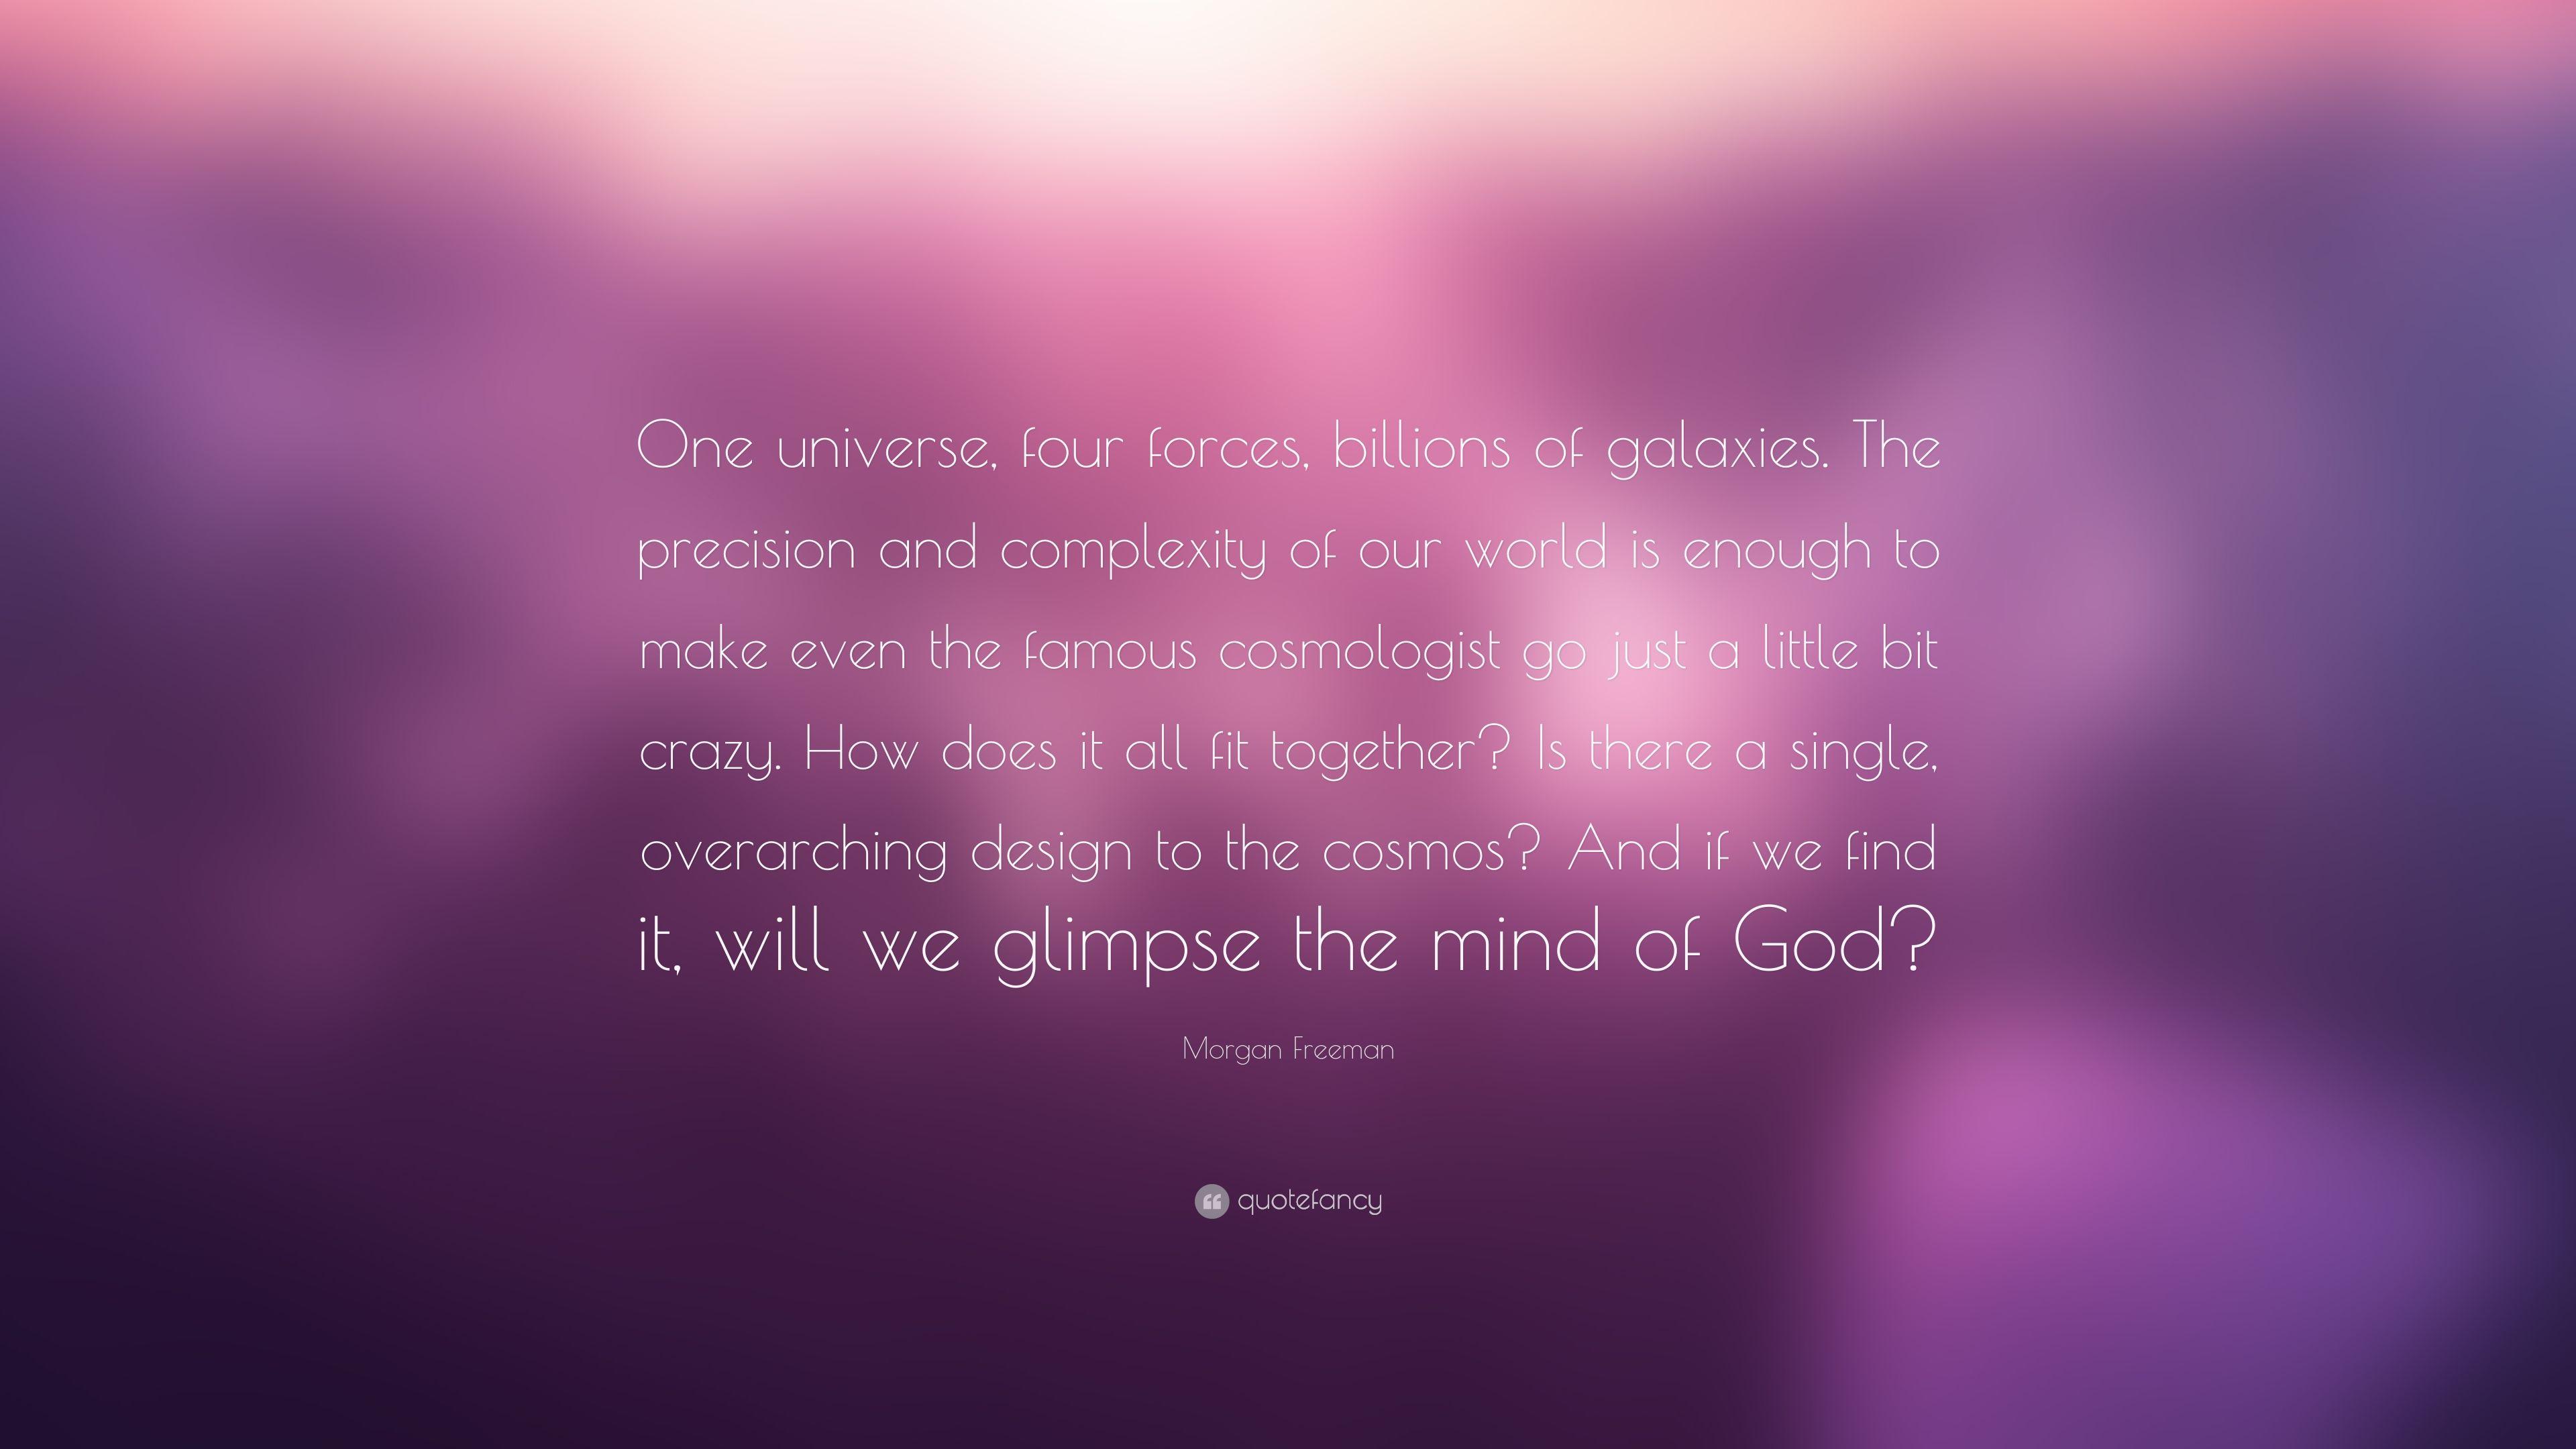 Morgan Freeman Quote: “One universe, four forces, billions